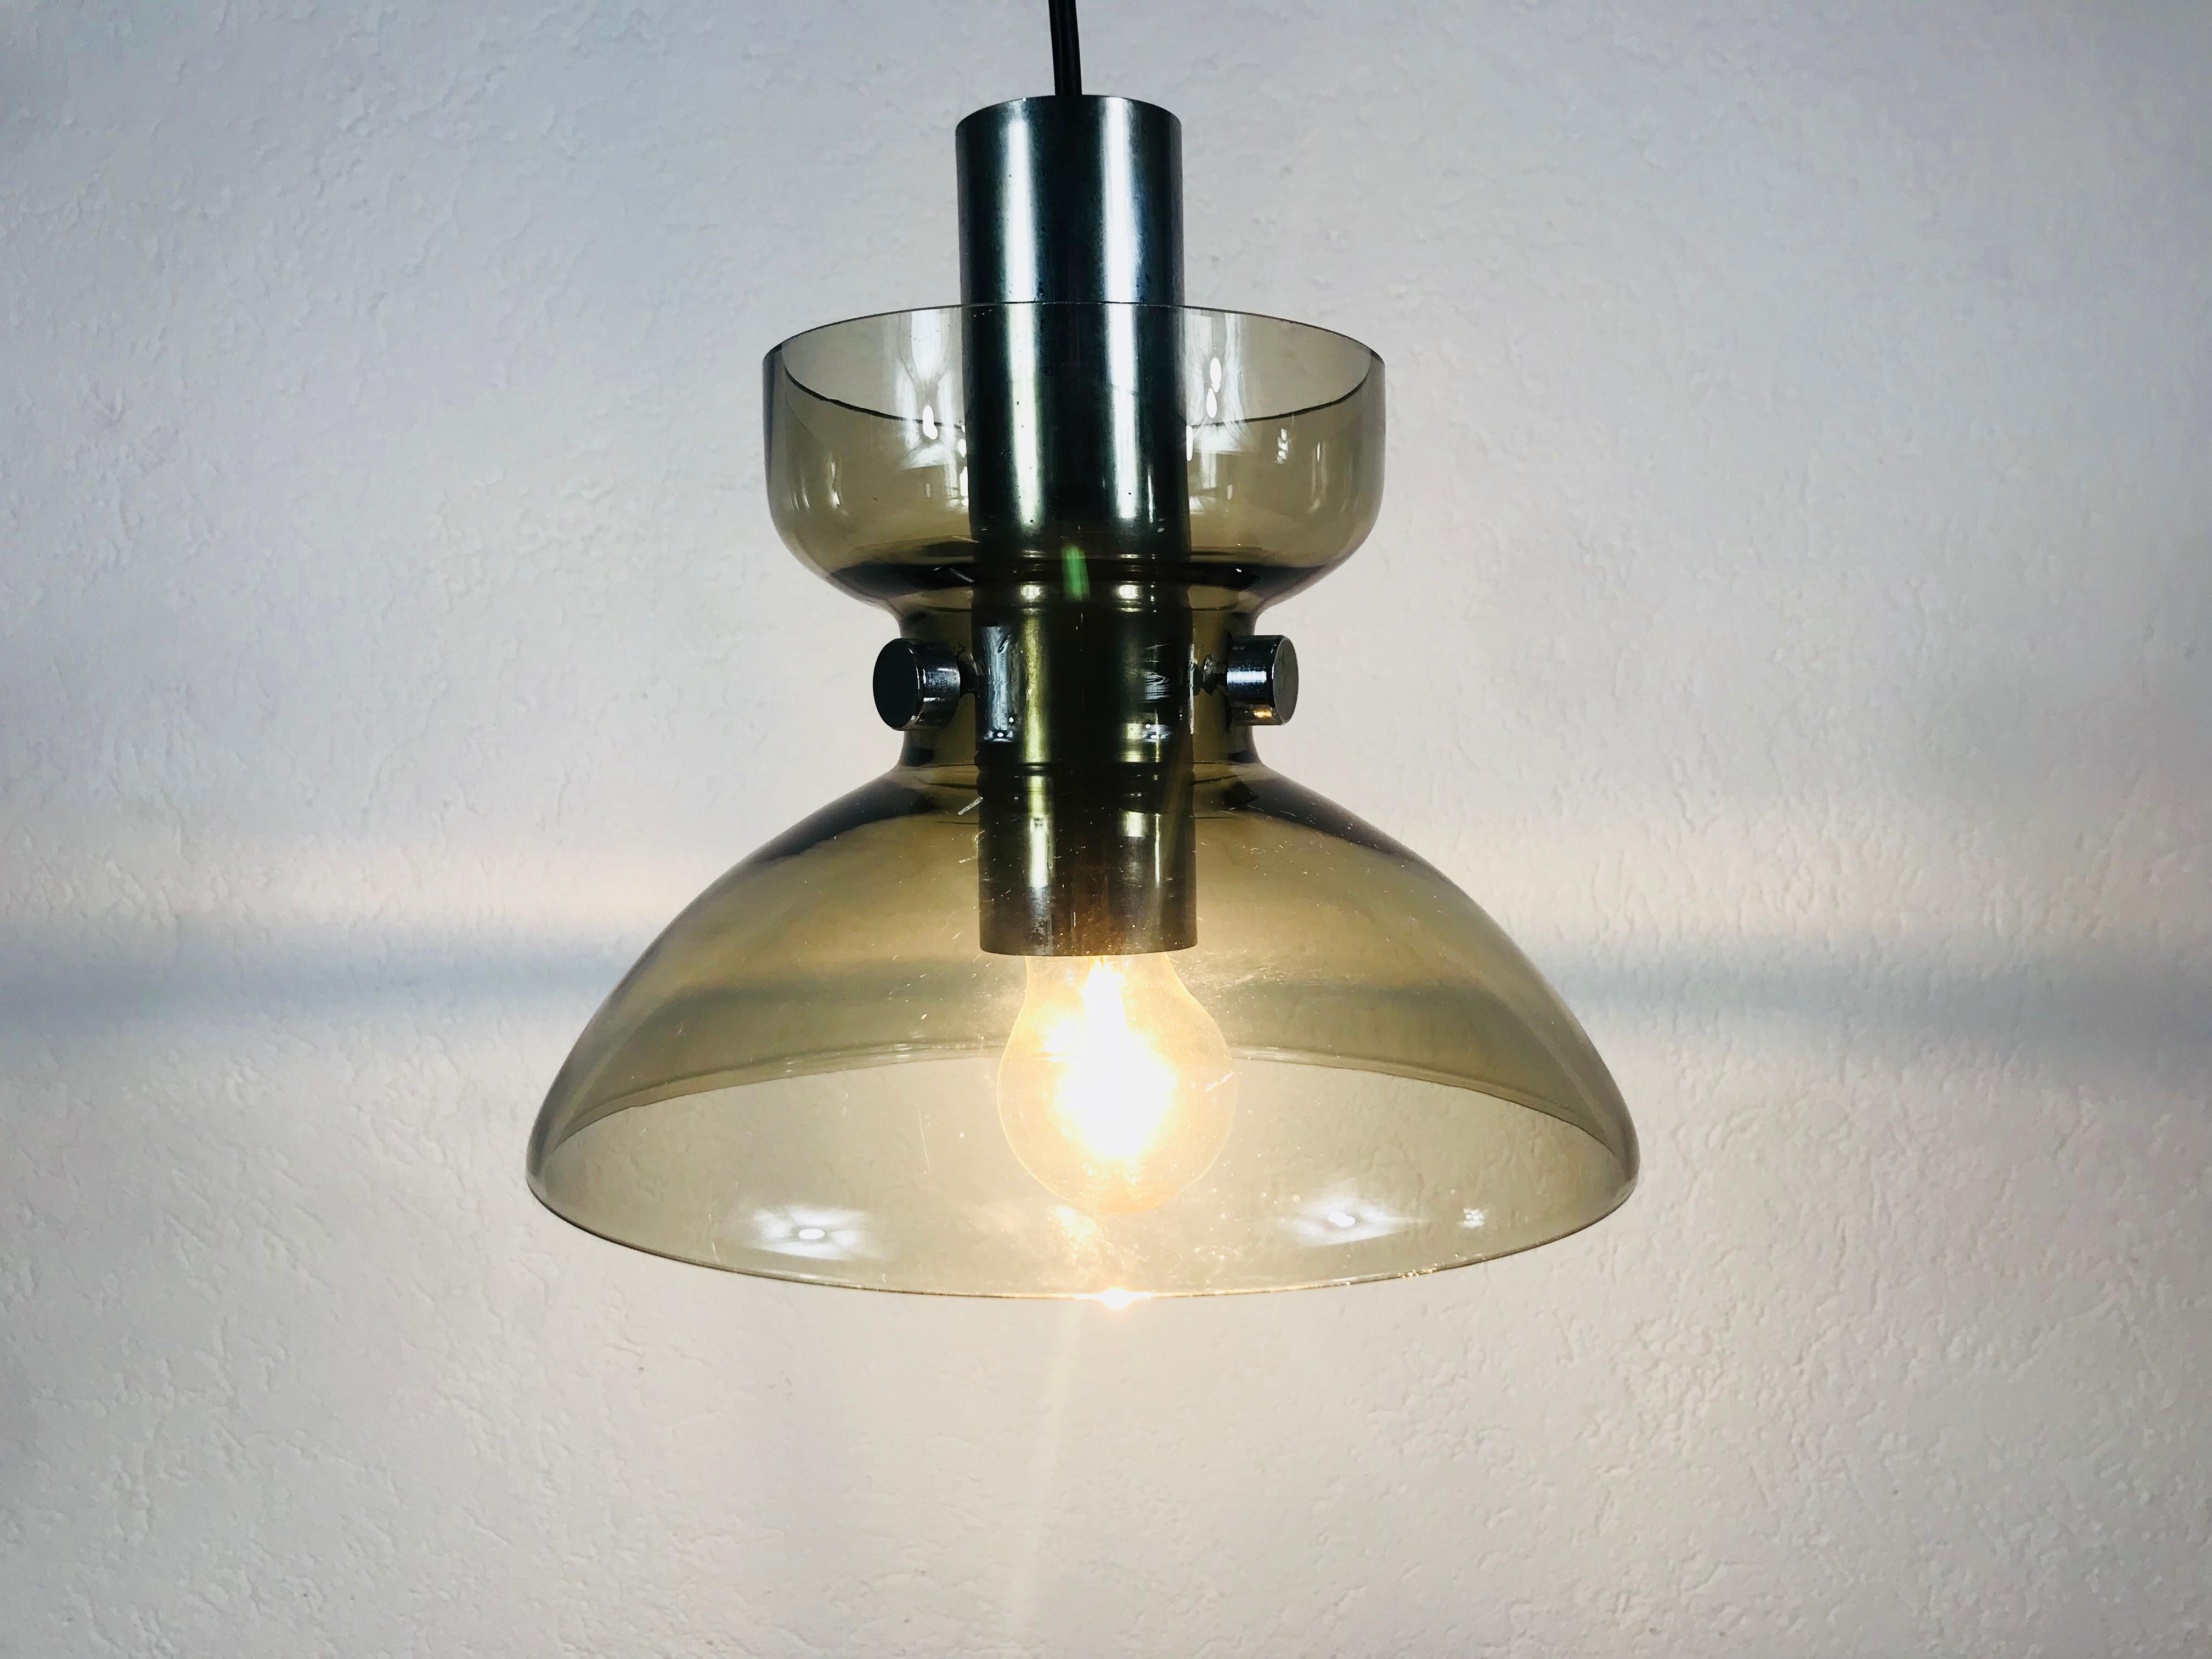 A vintage pemdant lamp by Glashütte Limburg made in the 1970s in Germany. It is fascinating with its beautiful shape. The is secured to the metal body with three metal screws.

The light requires one E27 light bulb.